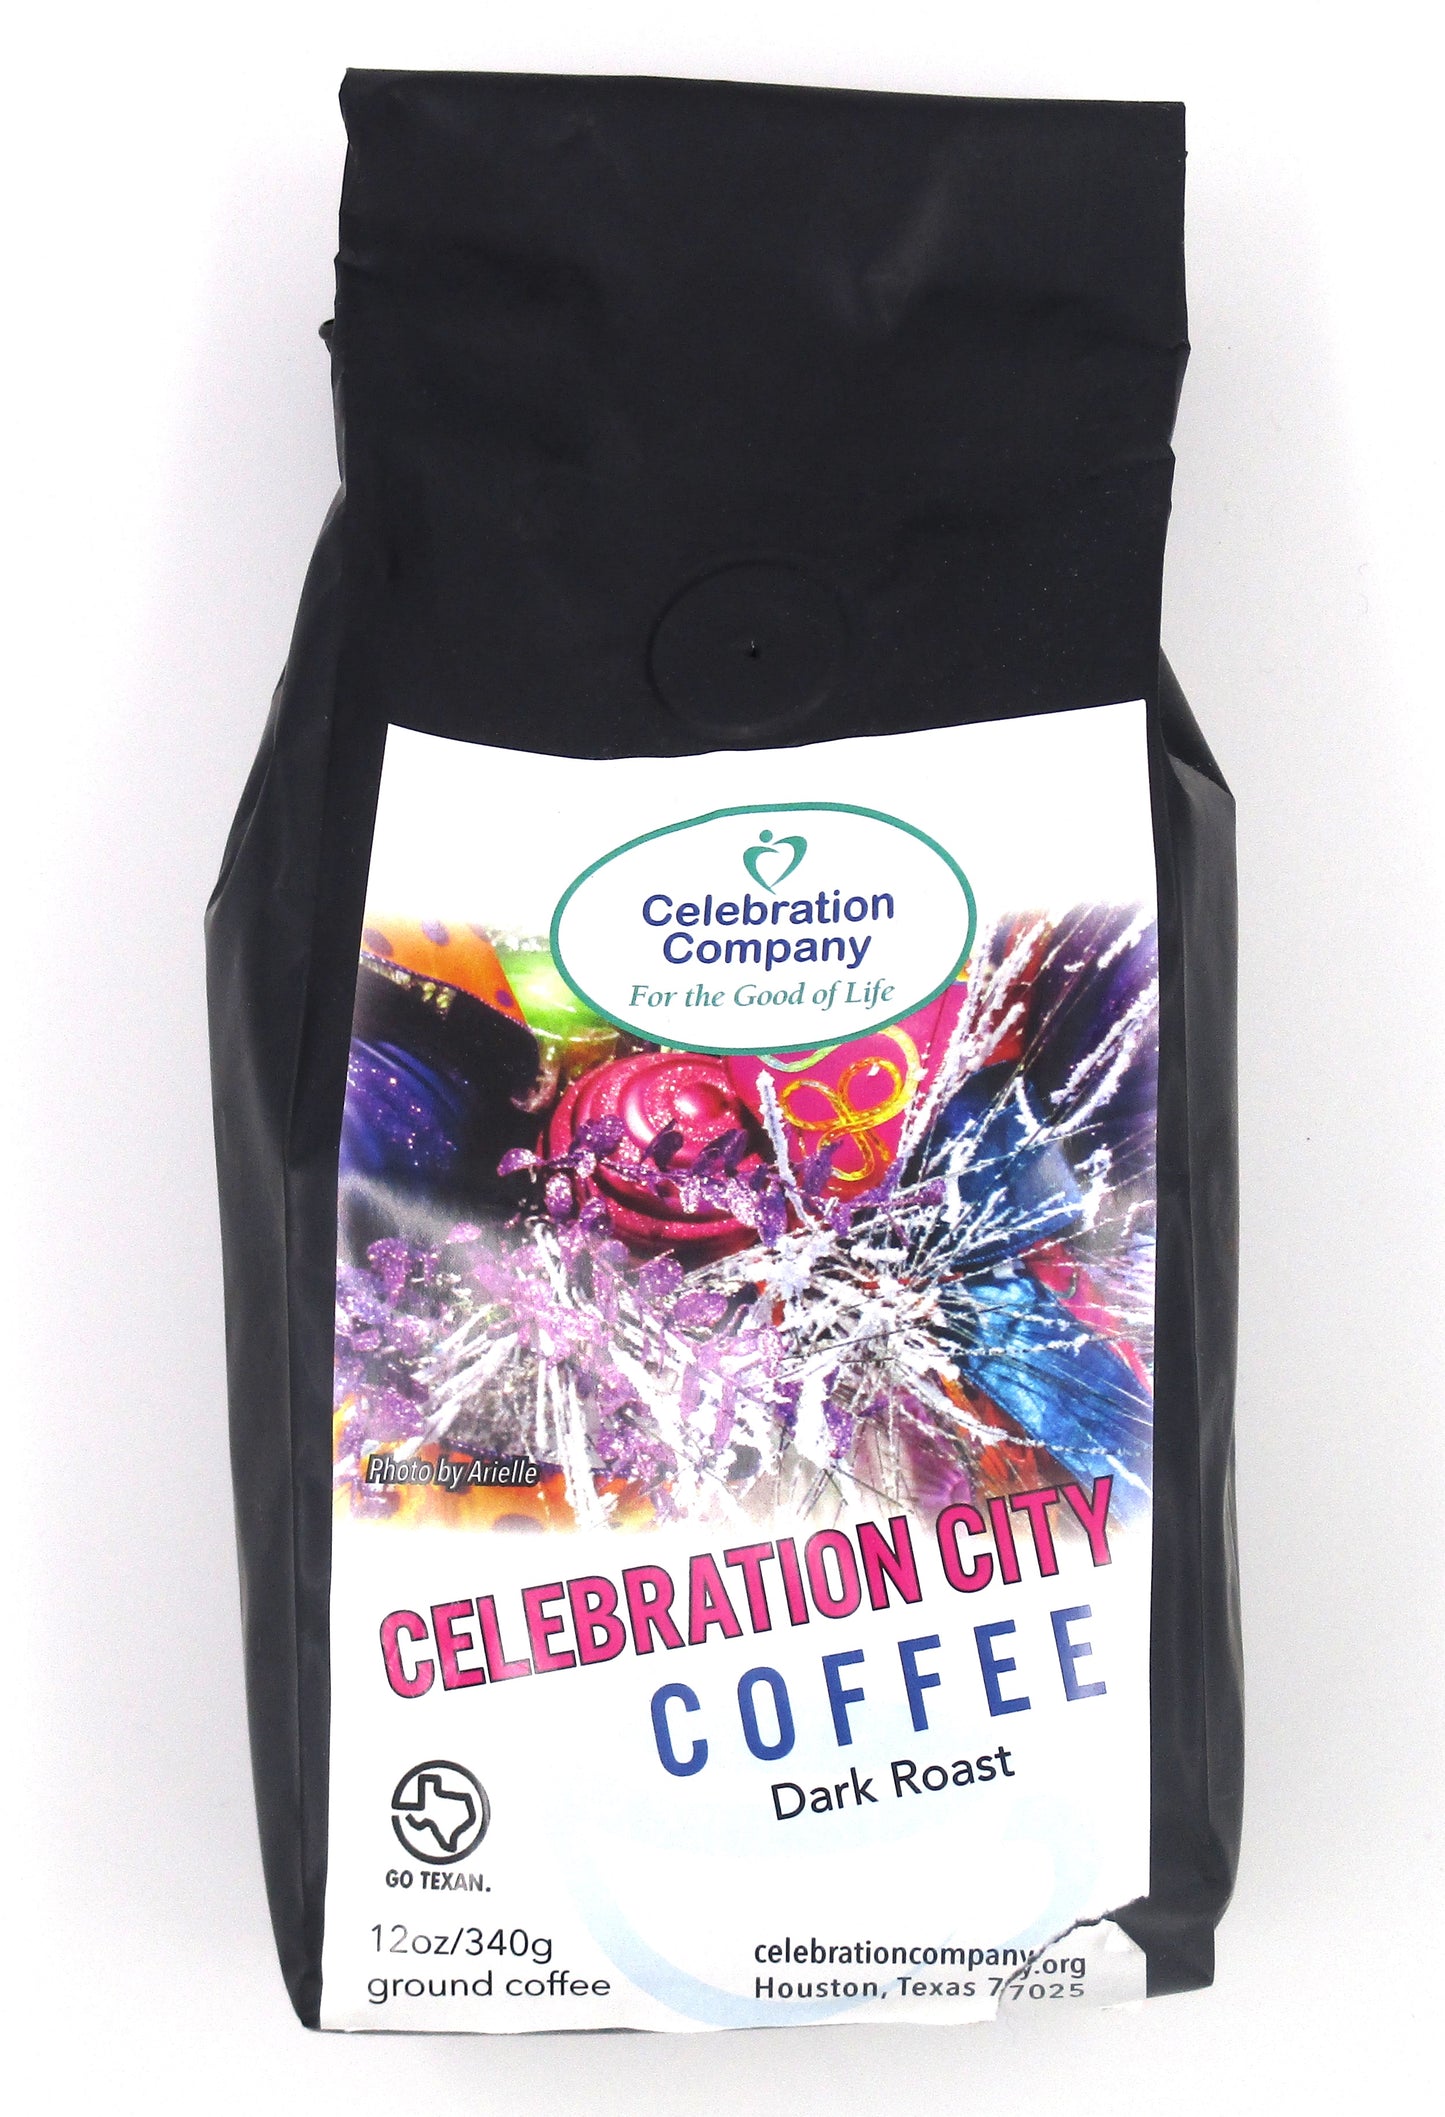 Black bag of coffee with white label for Celebration City Coffee Dark Roast